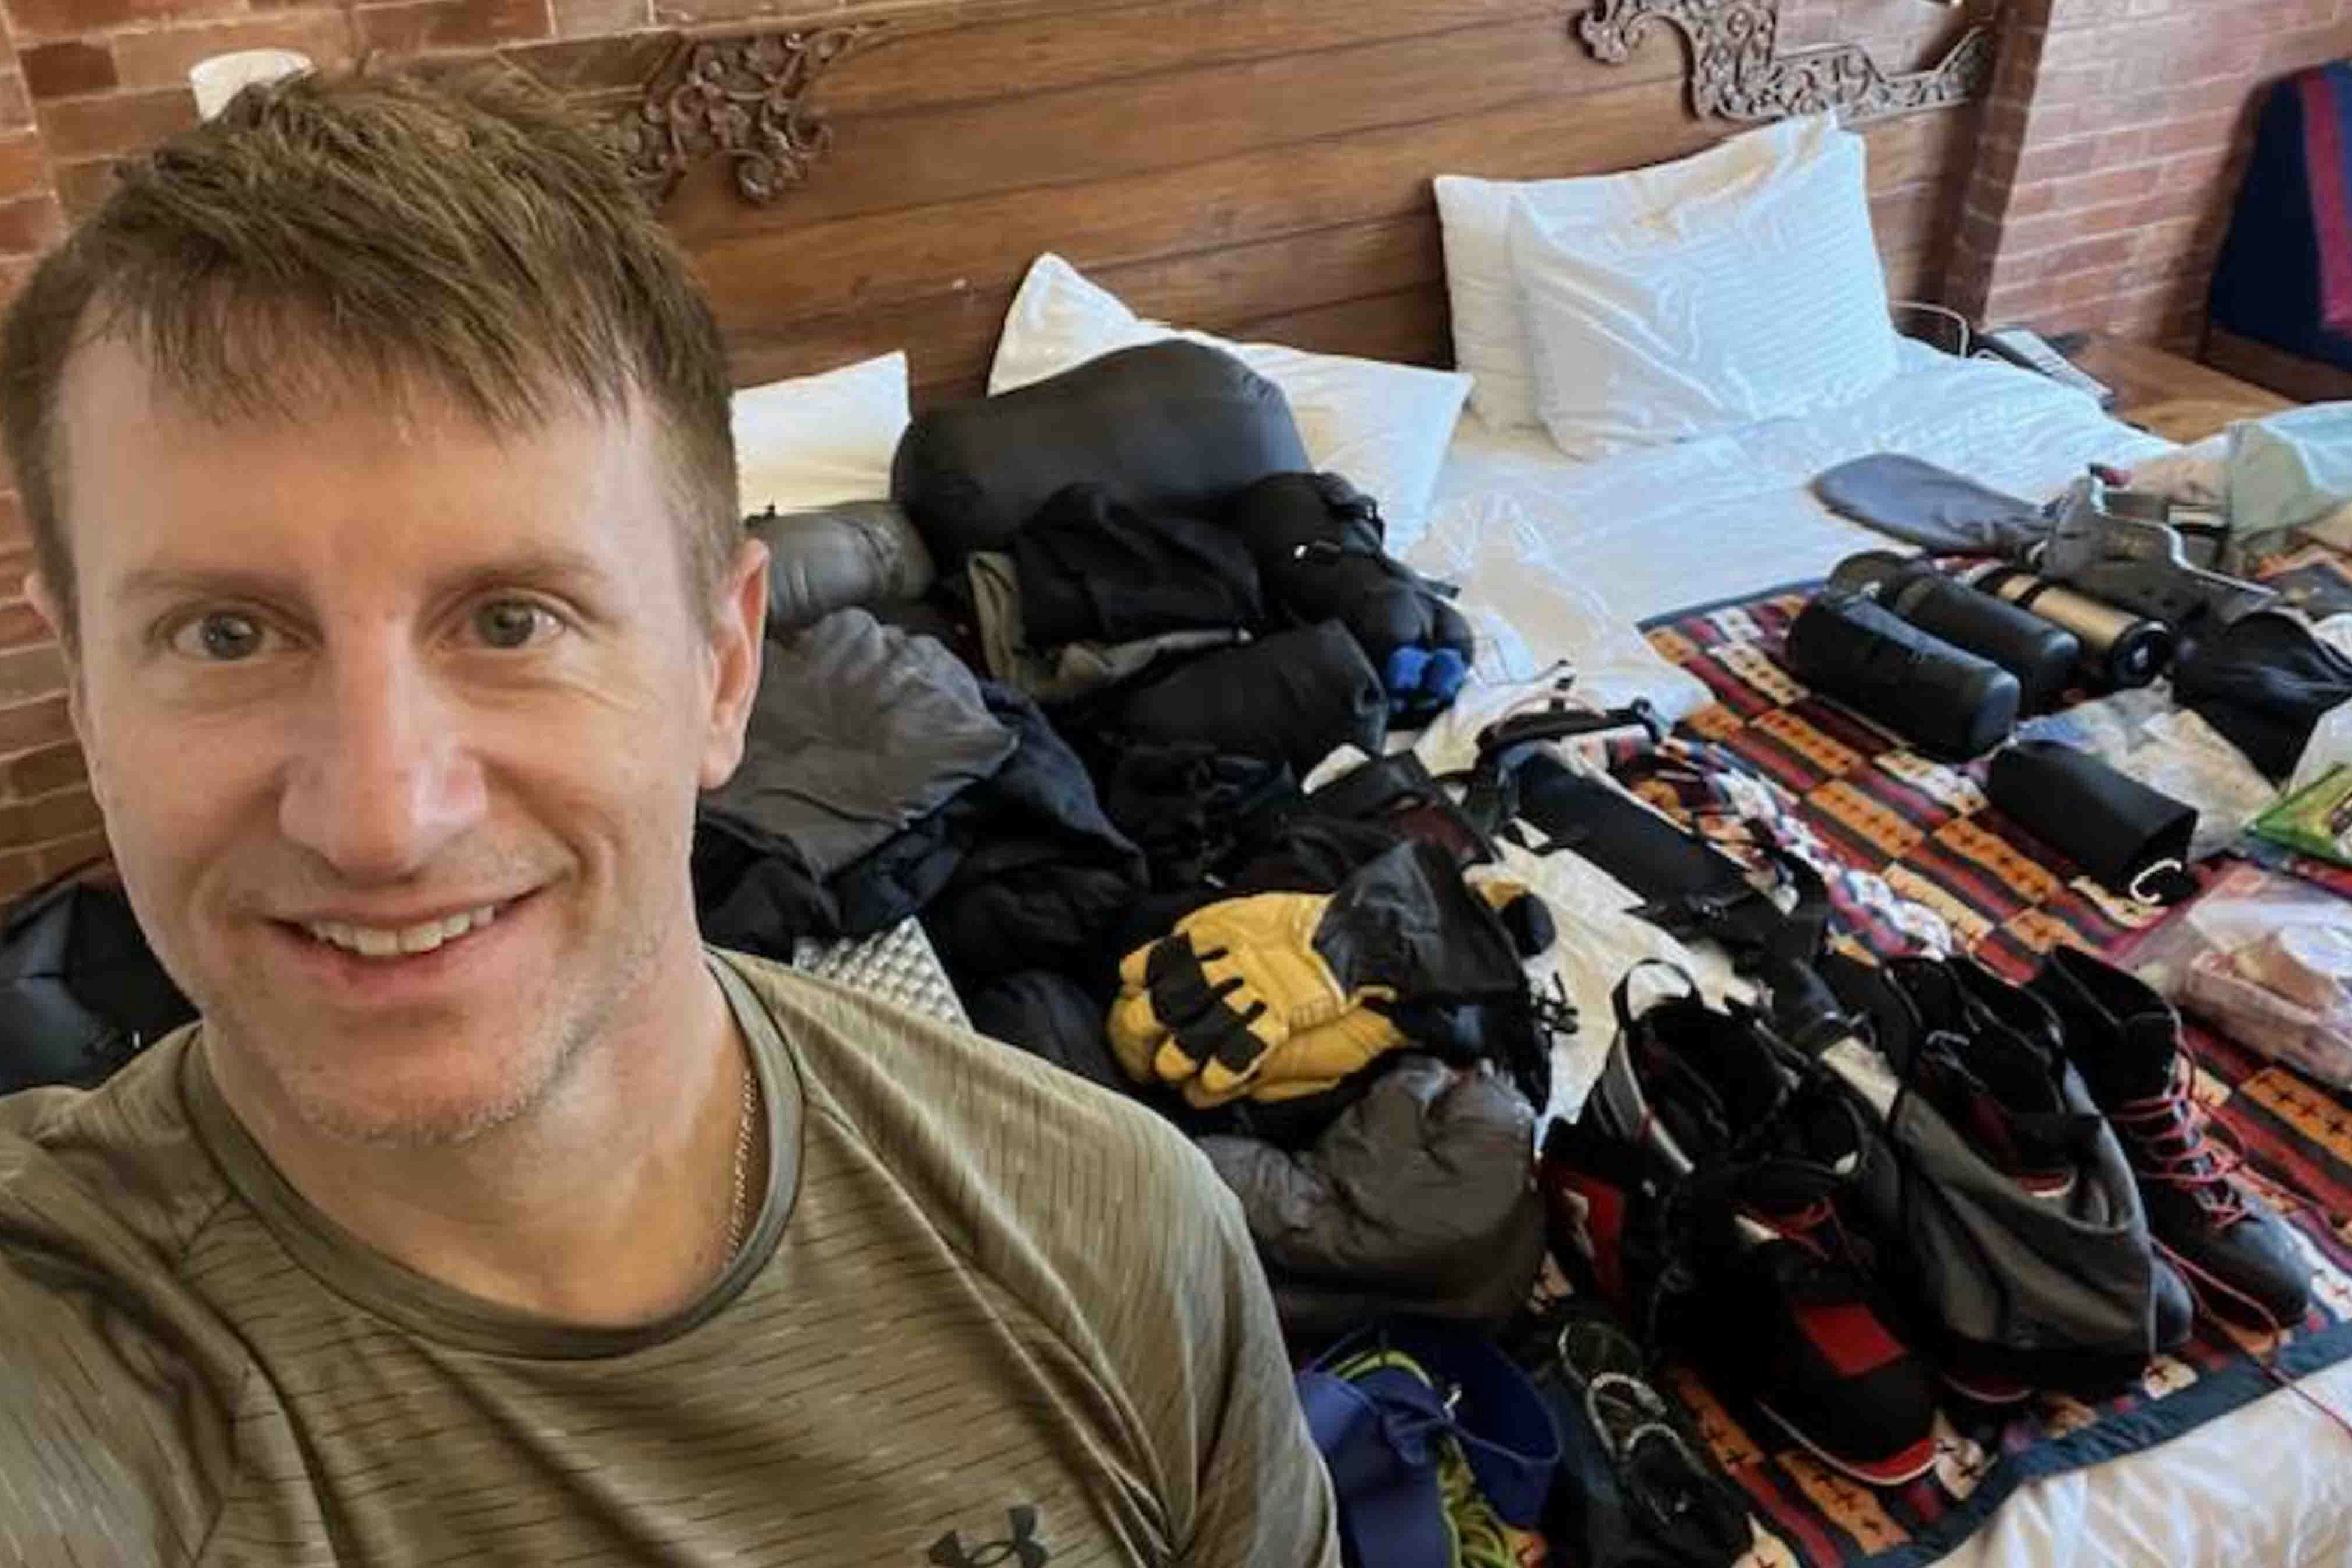 Casper mountaineer Dr. Joe McGinley reported Wednesday his climbing team was blocked from entering Tibet and getting to the north side of Mount Everest. They will head for the south side of the mountain instead. A positive step, he said, was successful completion of his gear check.